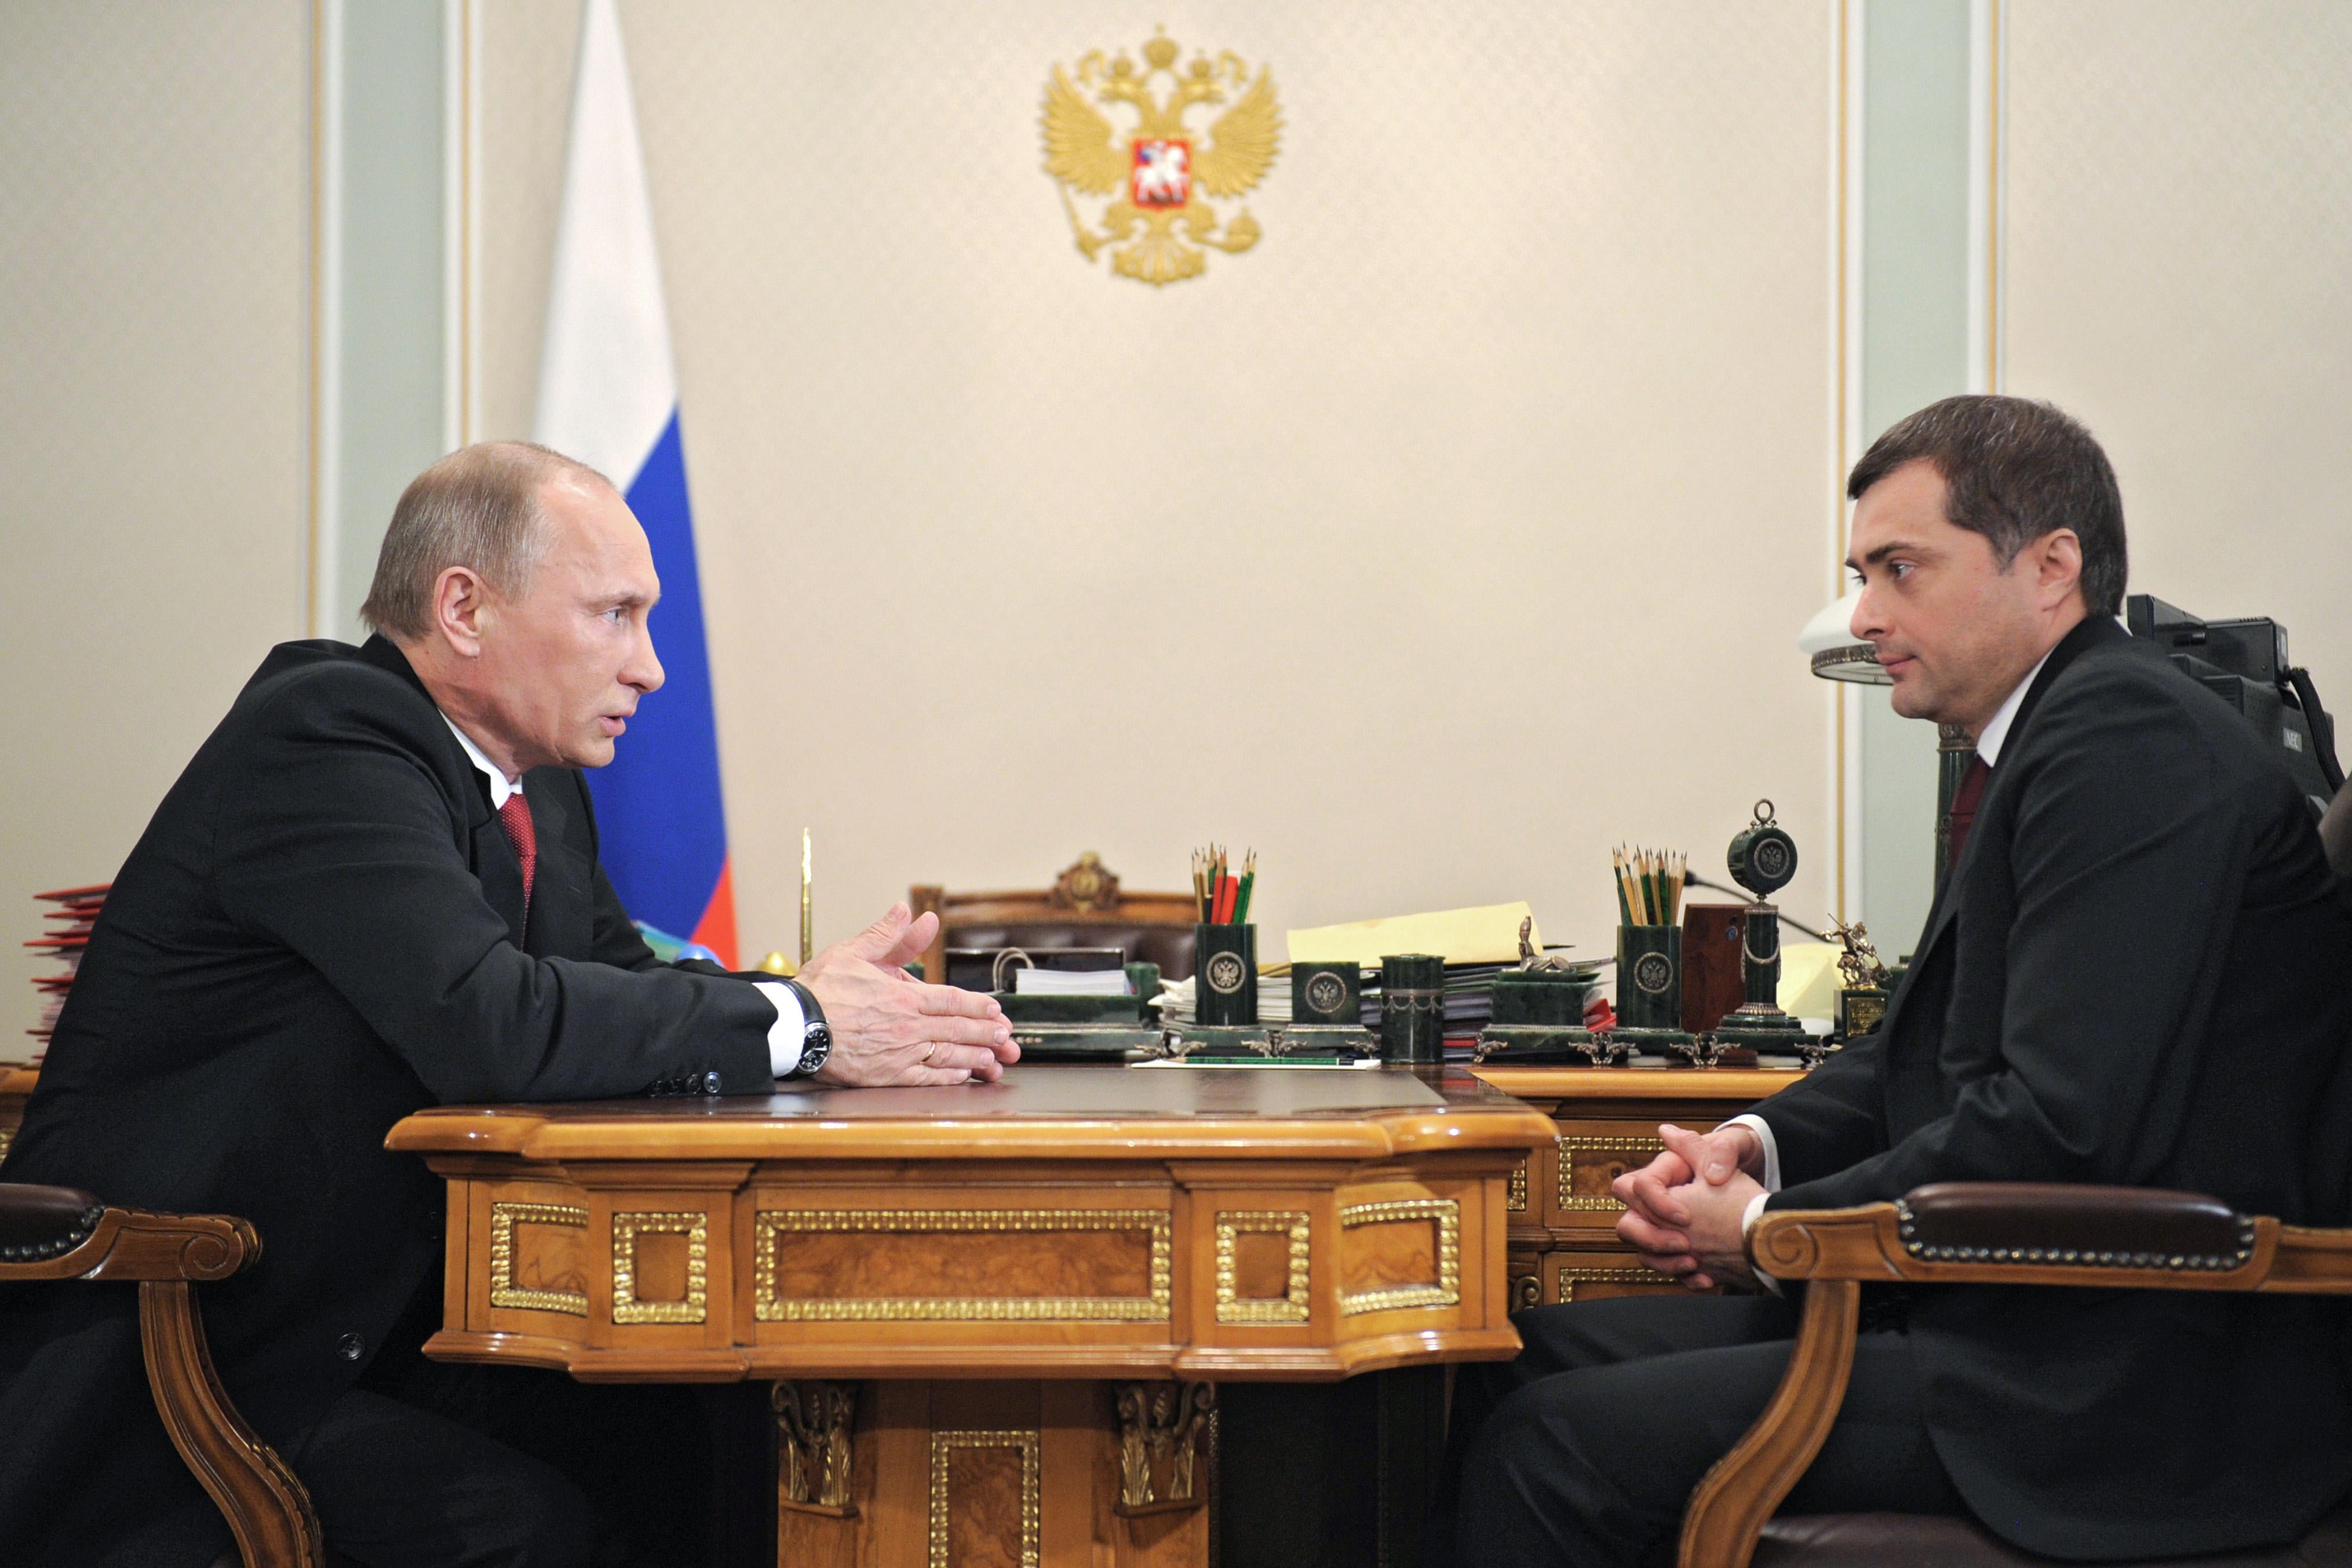 Russia's Prime Minister Vladimir Putin (L) speaks with former Kremlin first deputy chief of staff, Vladislav Surkov,  during their meeting in Putin's Novo-Ogaryovo residence outside Moscow, on December 30, 2011. The Kremlin announced  earlier this week that Surkov, the man credited with designing Russia's tightly-controlled political system, was leaving his job as deputy Kremlin chief of staff and would take charge of economic modernisation. Russian newspapers reported that Putin was personally responsible for the sidelining Surkov, who designed Russia's tightly-controlled politics and did not avert this month mass protests over disputed parliamentary elections. AFP PHOTO/ RIA-NOVOSTI/ ALEXEY DRUZHININ (Photo credit should read ALEXEY DRUZHININ/AFP/Getty Images)